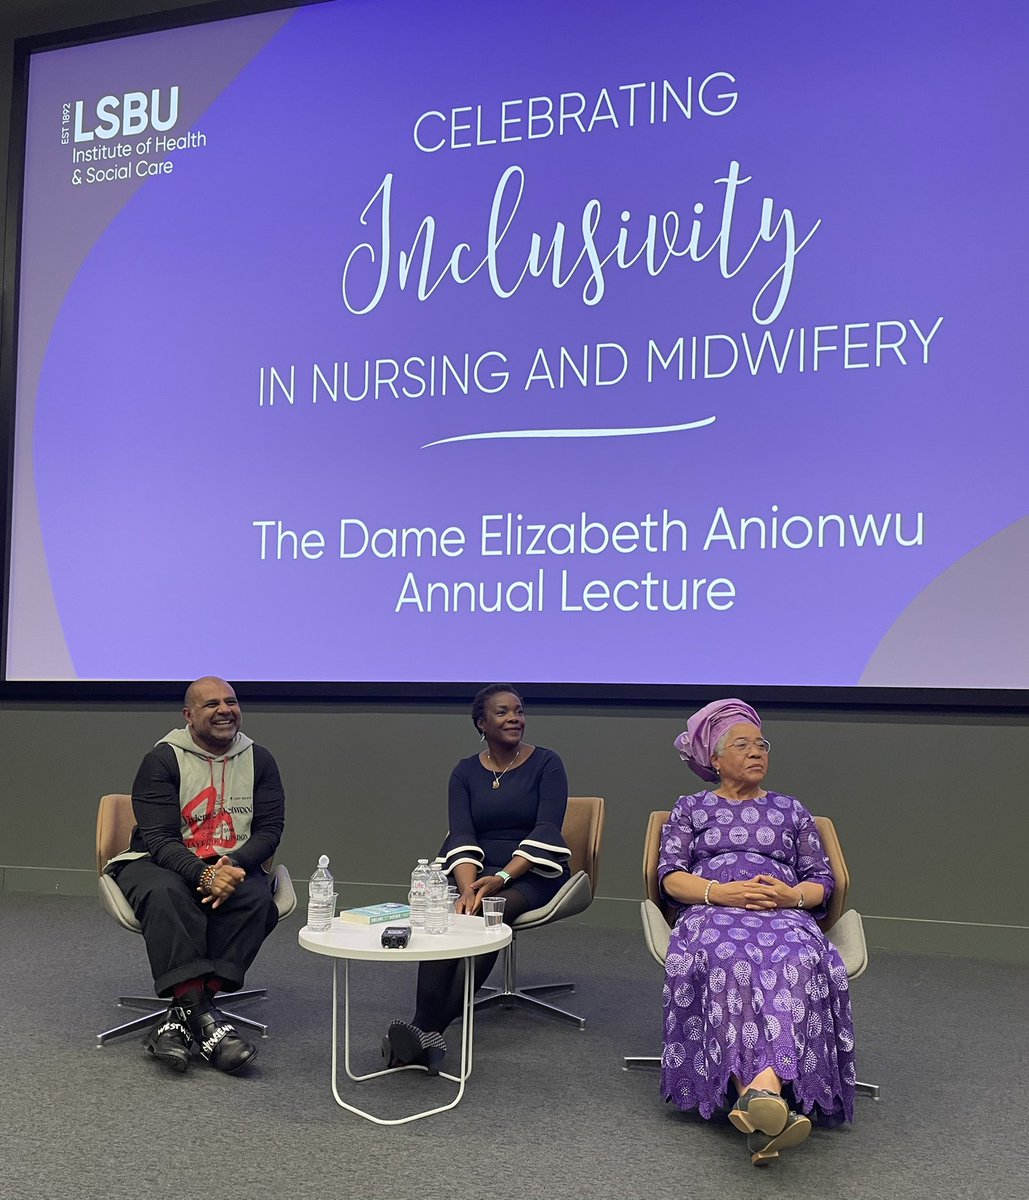 Where do I begin‼️..such an awesome inspirational evening #thankyou @CalvinMoorley for organising @lauraserrant for giving such a powerful lecture in honour of my incredible friend living legend @EAnionwu #proud thanks to @NurseReema @JoseCloyd for accompanying me x